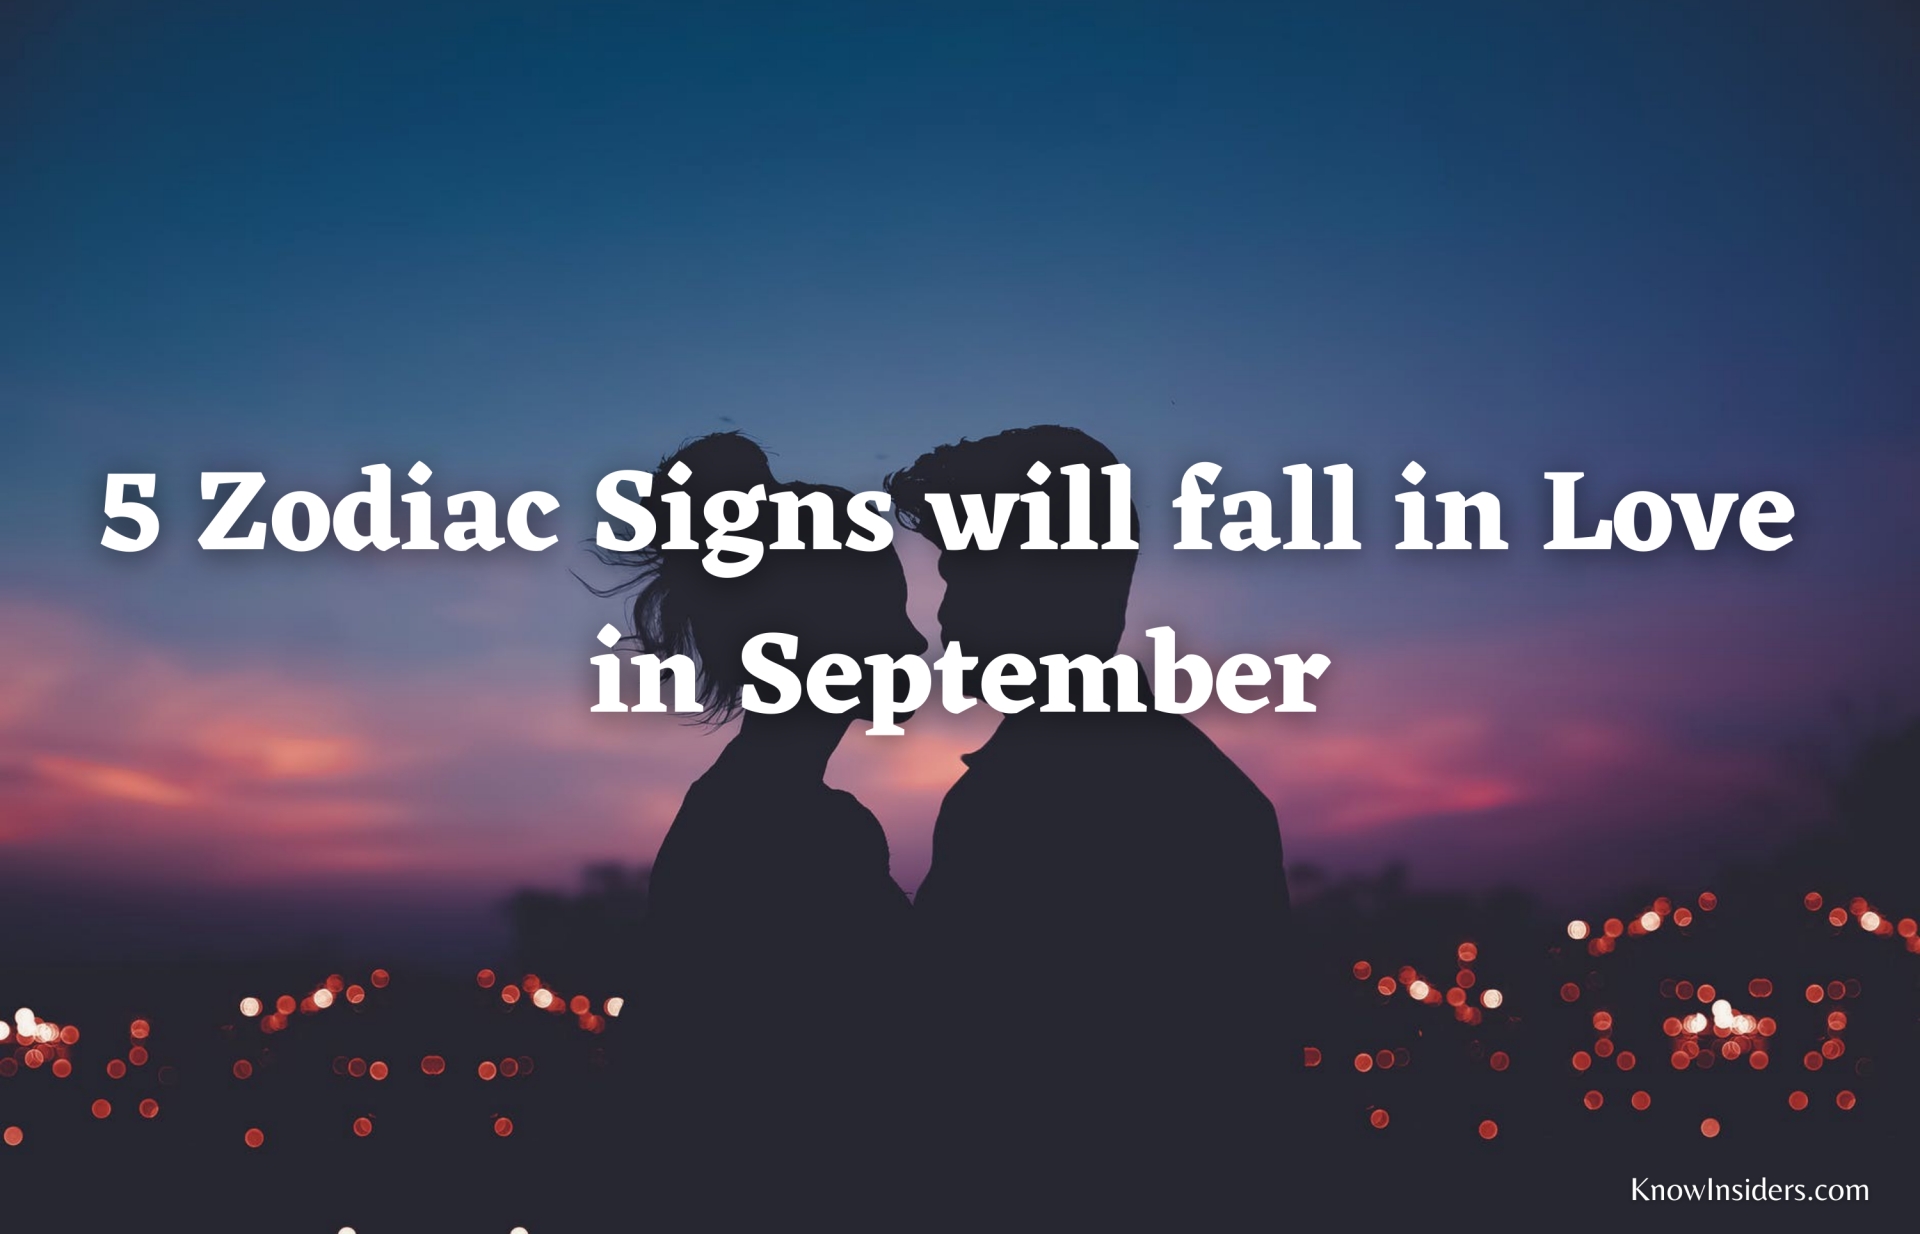 5 Zodiac Signs Will Fall in Love in September - According to Astrology